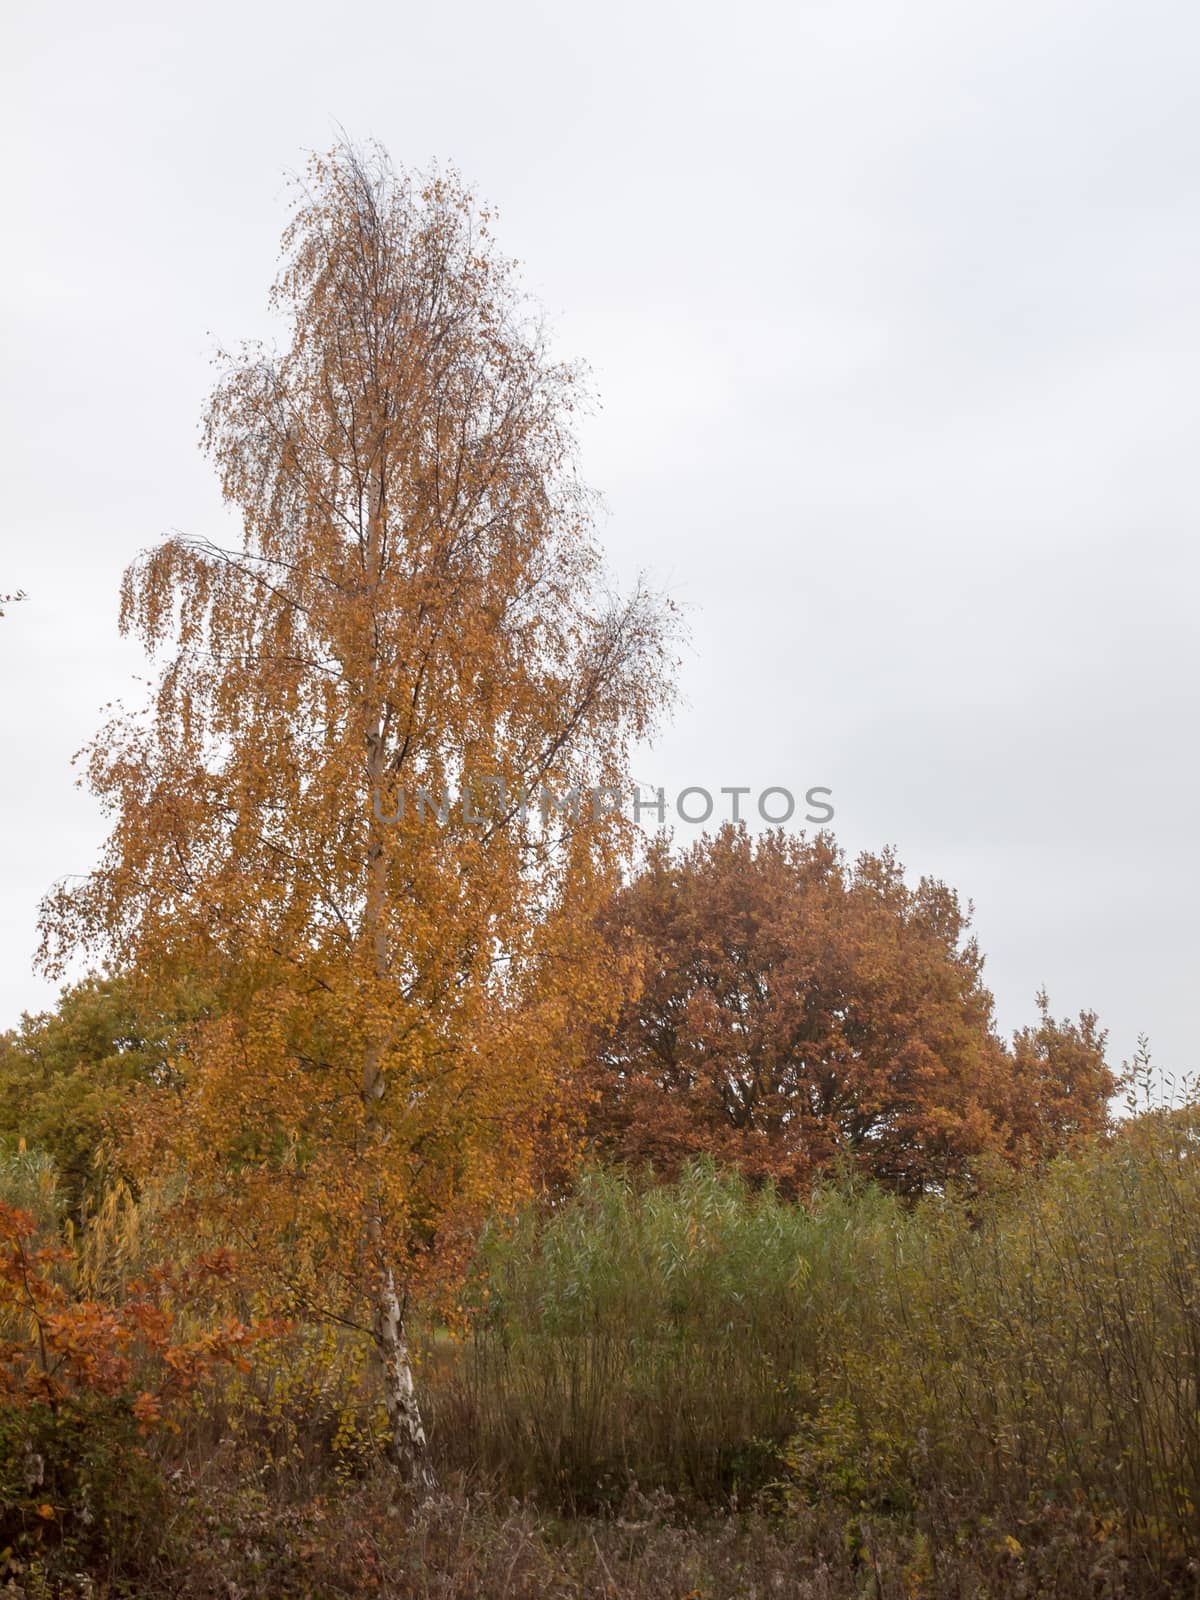 autumn red orange tree leaves brown autumn overcast moody sky background space country landscape; essex; england; uk